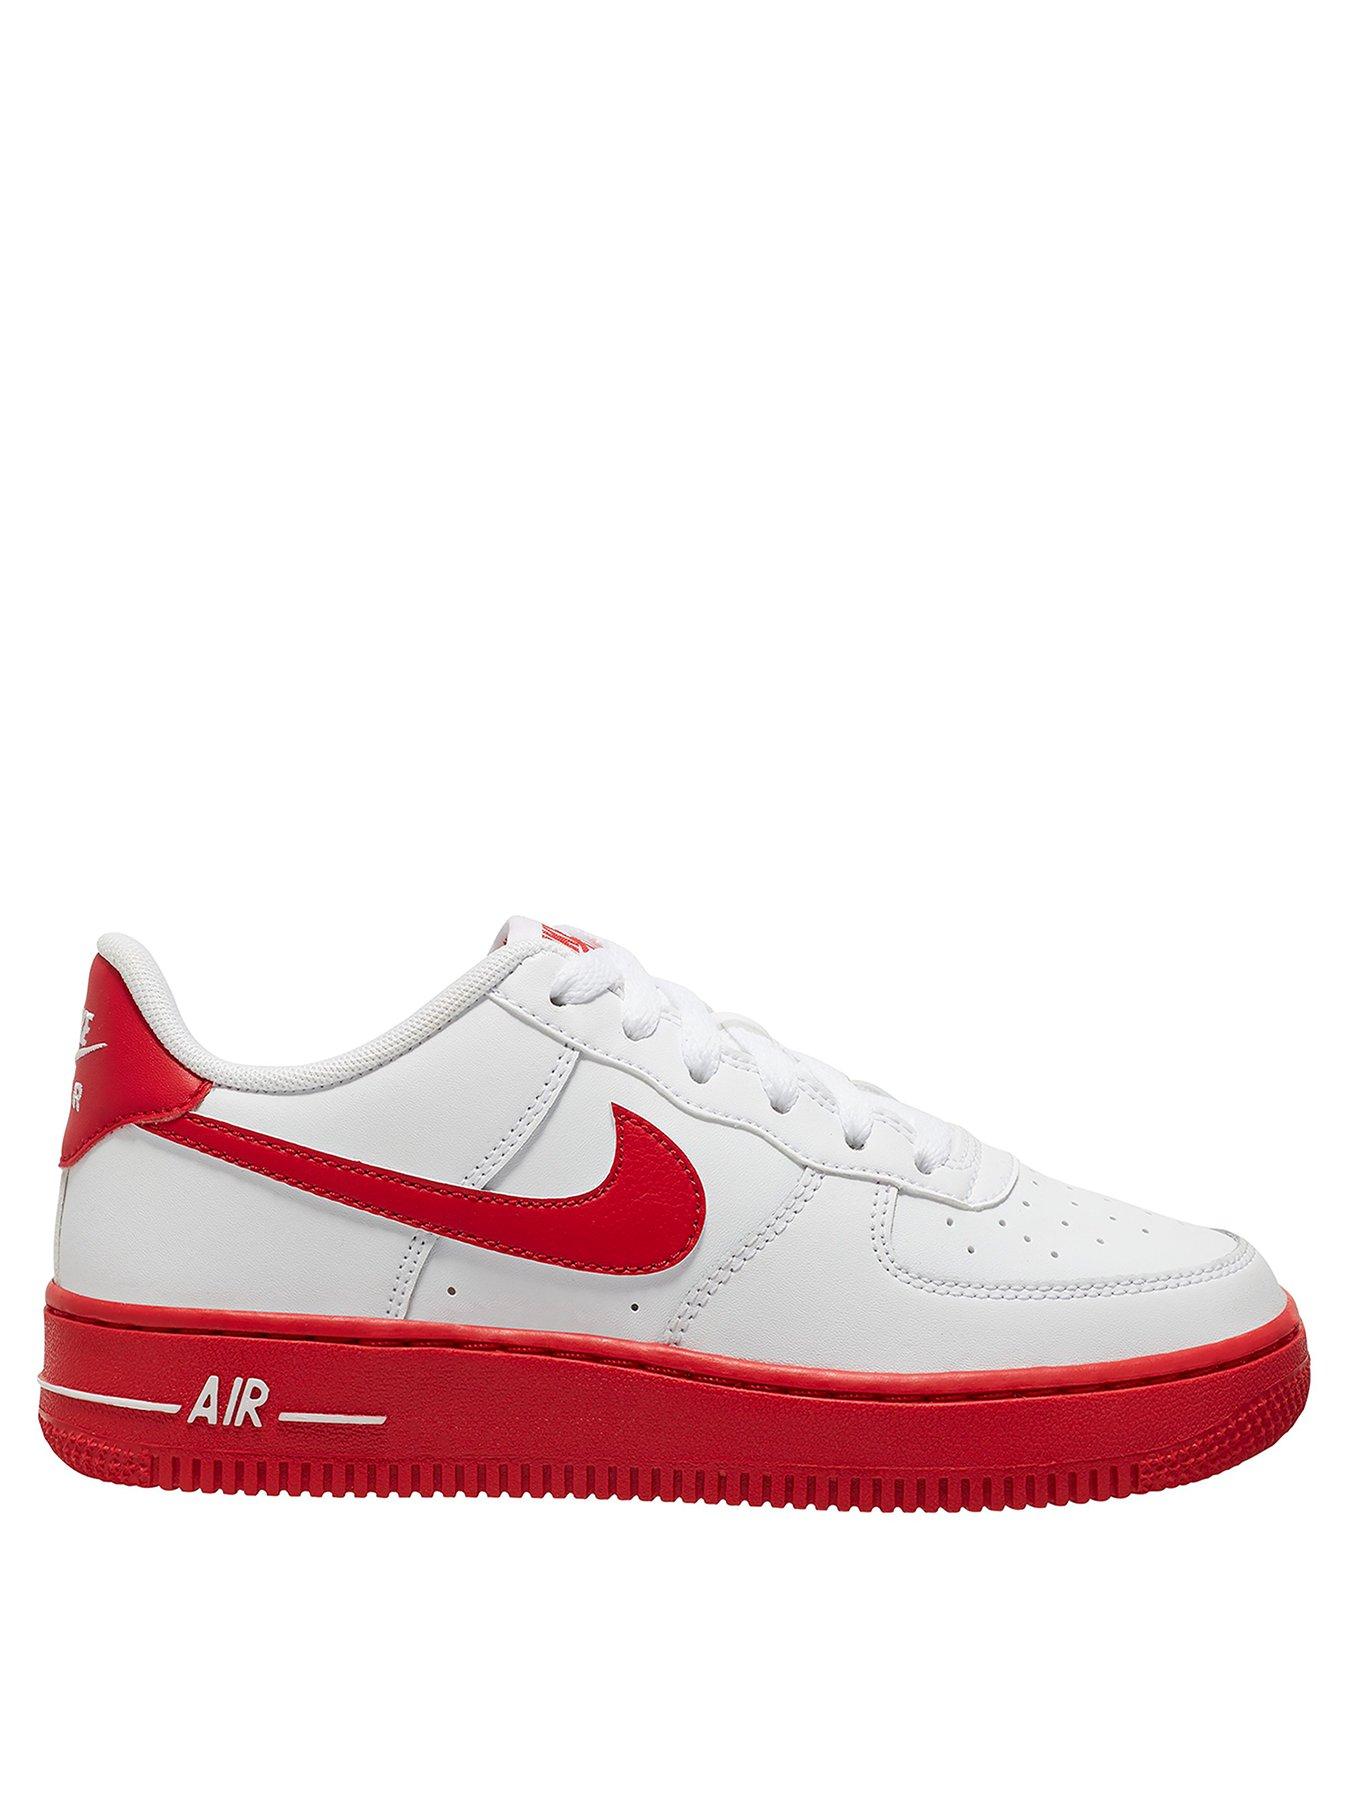 air force size 4 junior